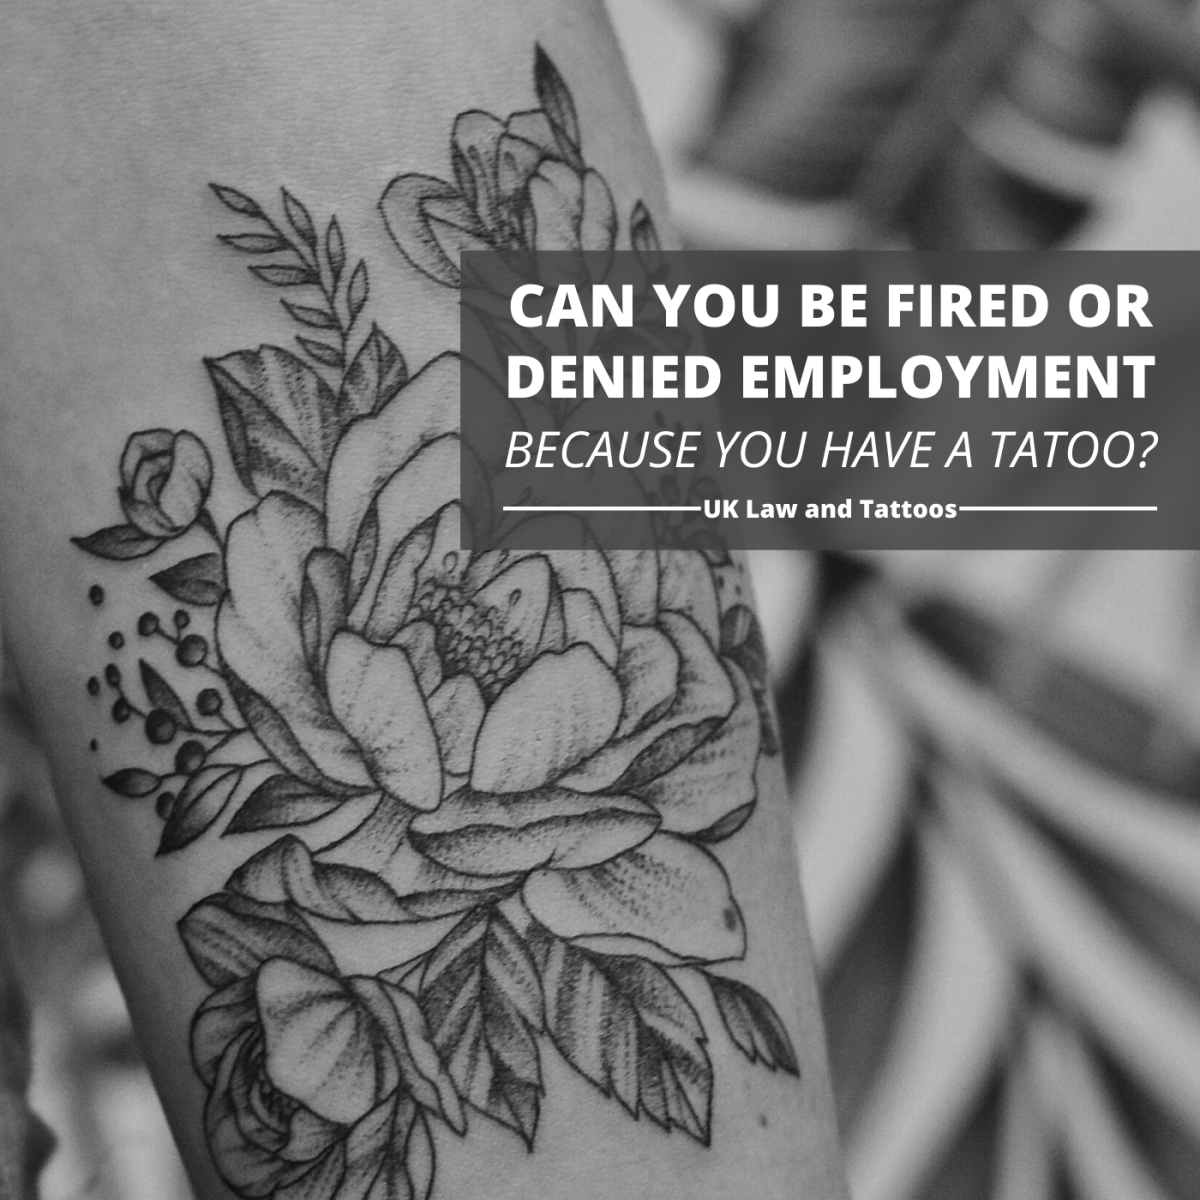 Can You Be Fired for Having a Tattoo in the UK?